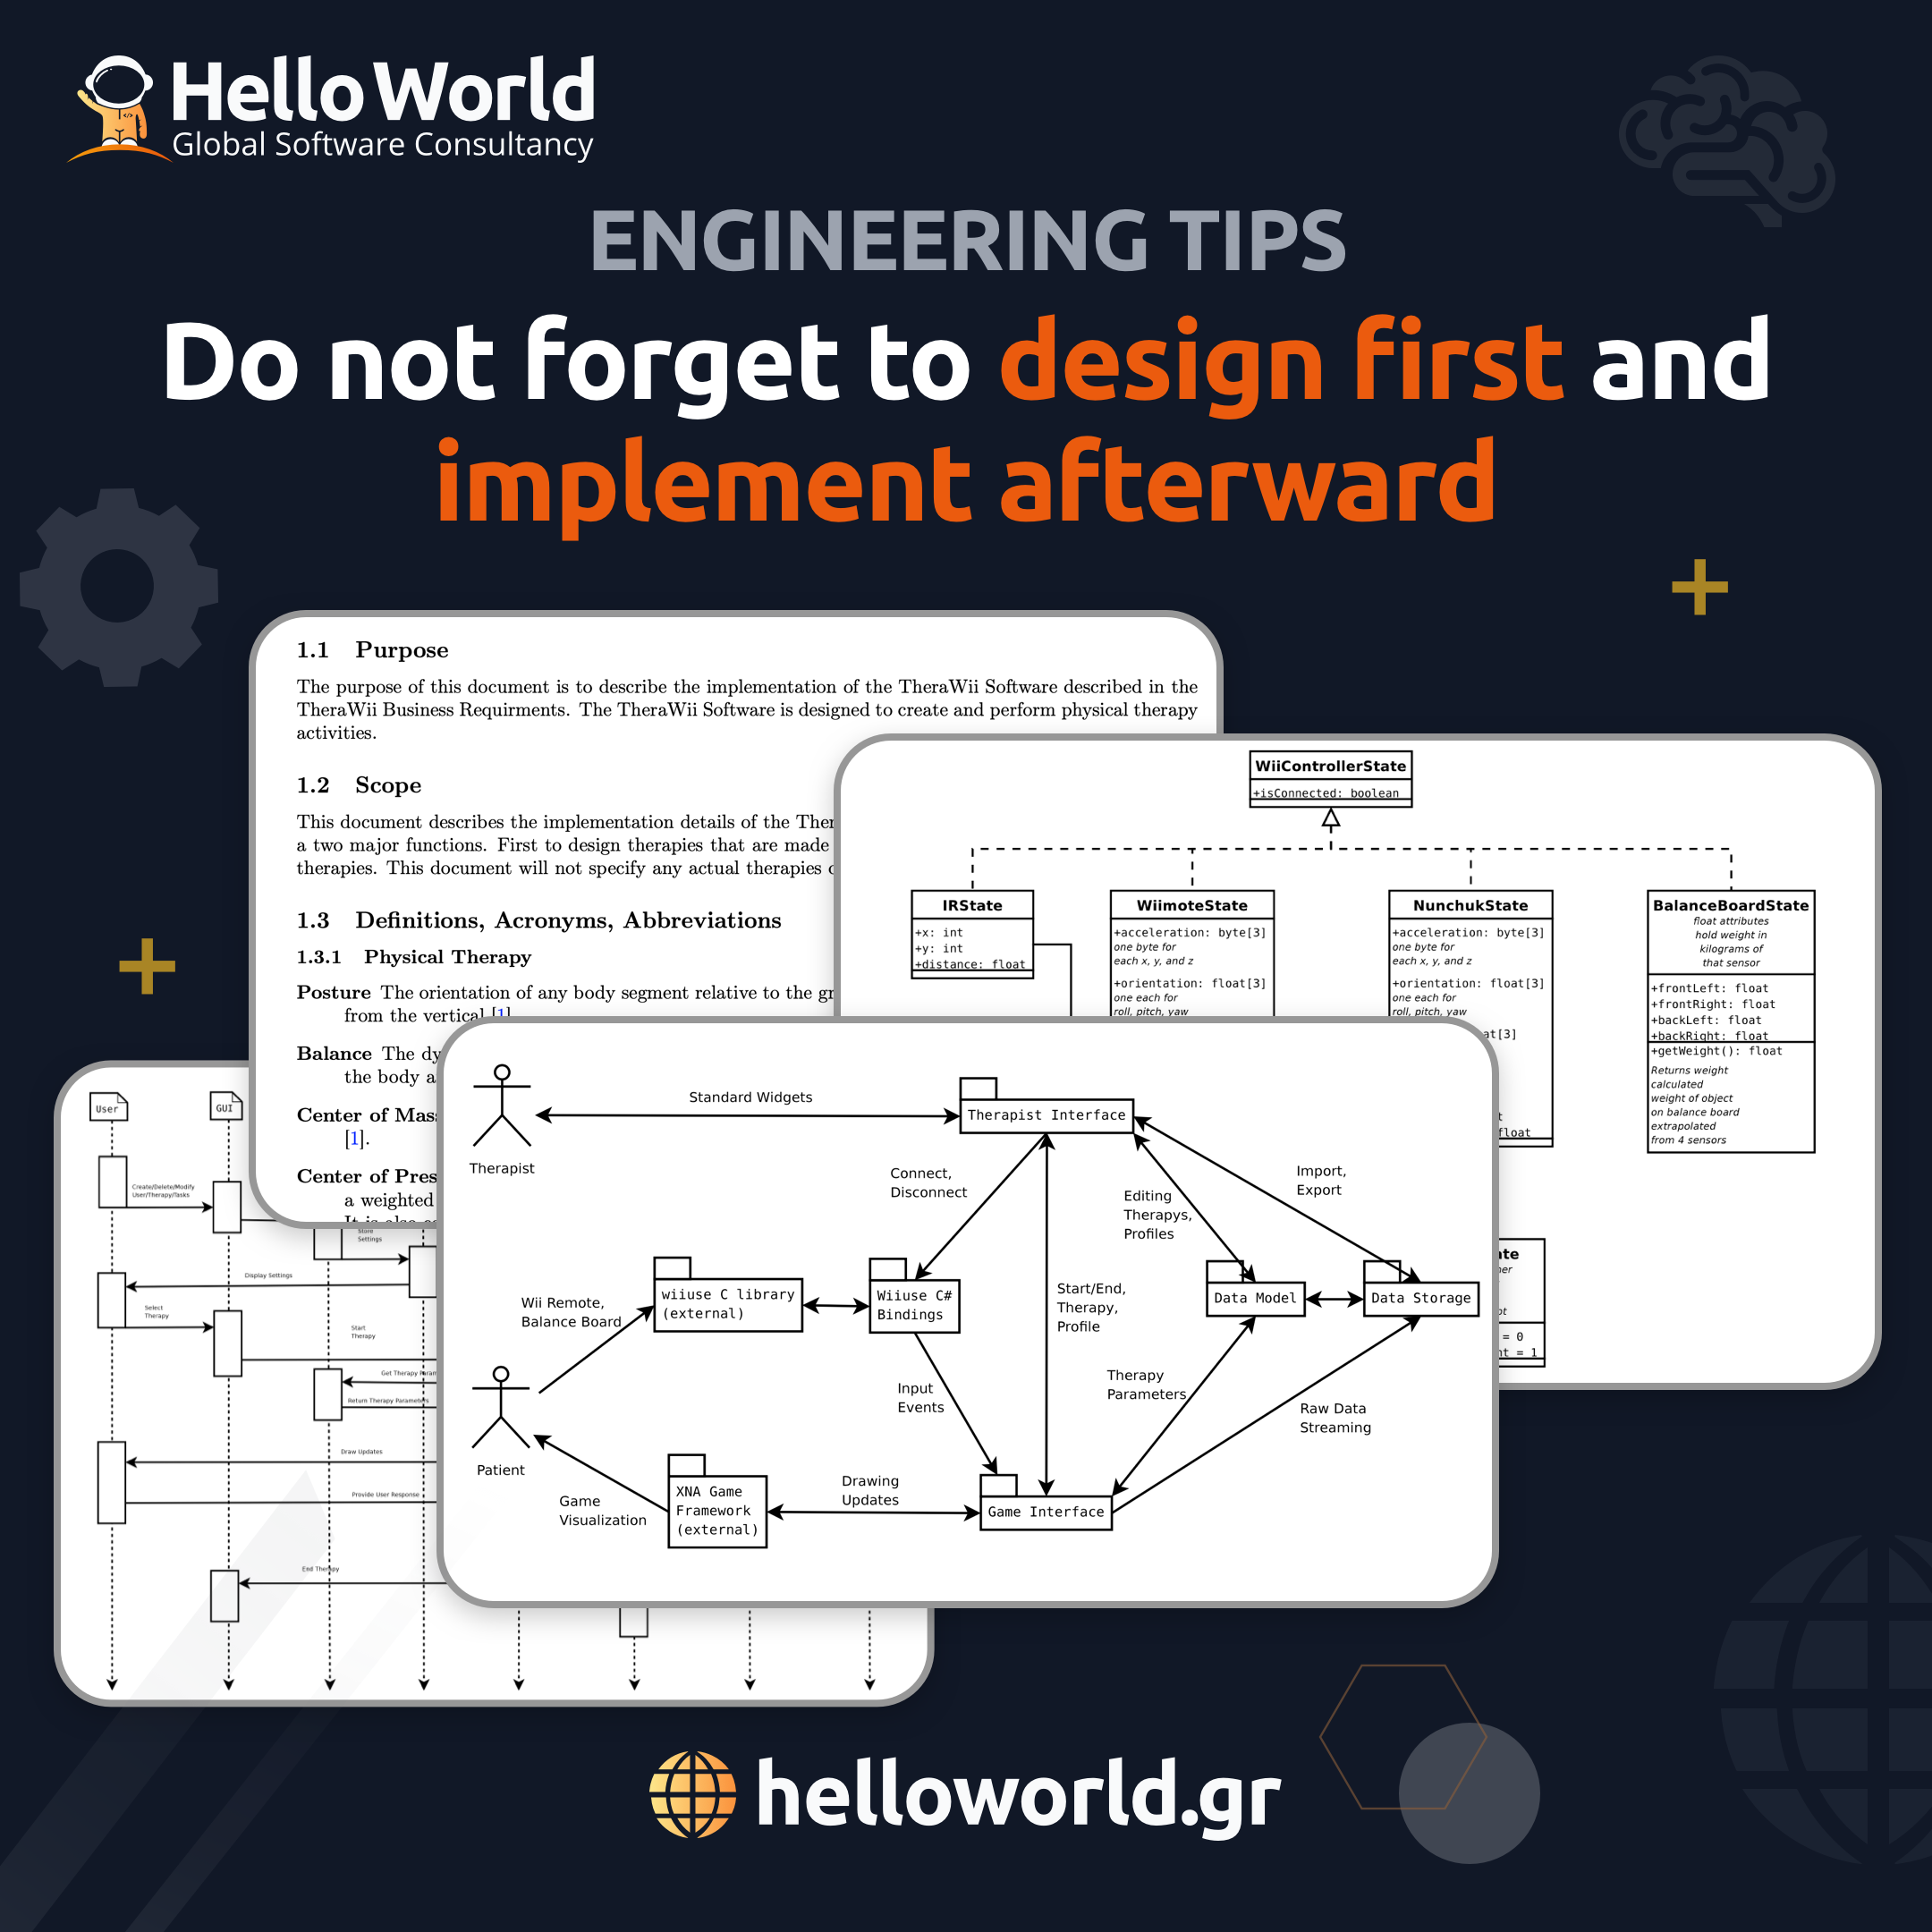 Do not forget to design first and implement afterward